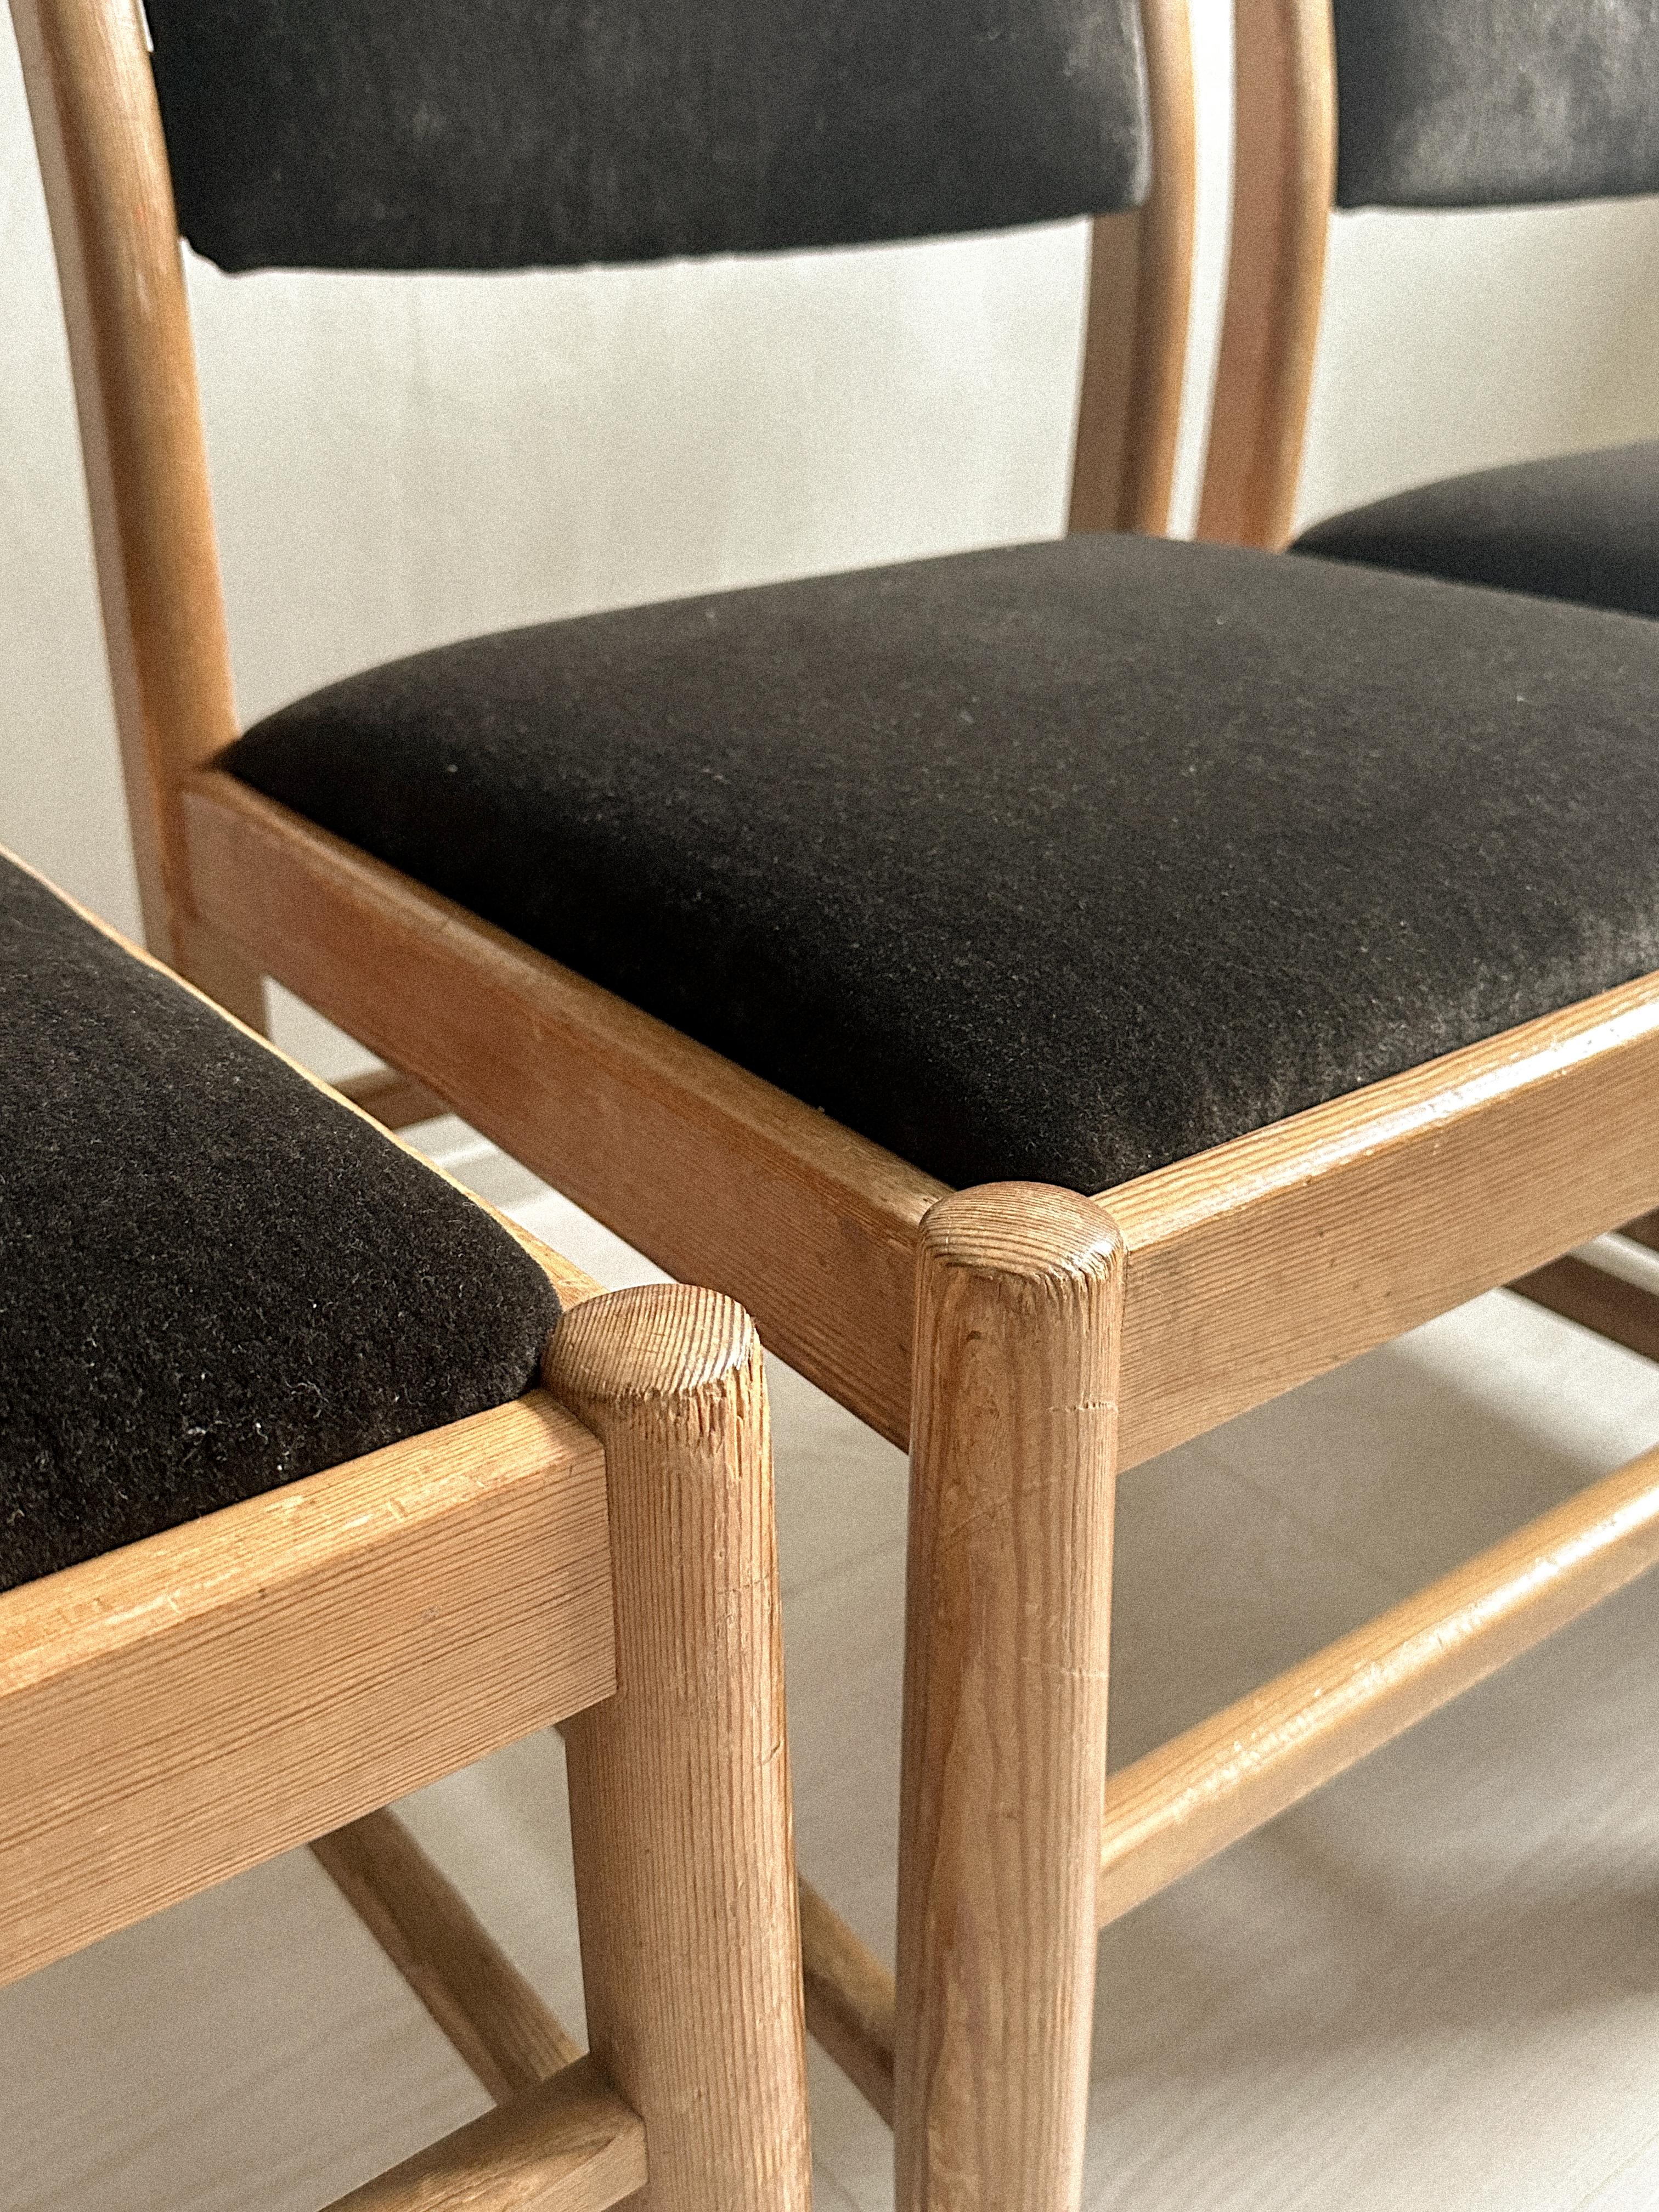 A Set of 4 Dining Chairs, Pine and Wool Velour, Scandinavia, c. 1960s  For Sale 2